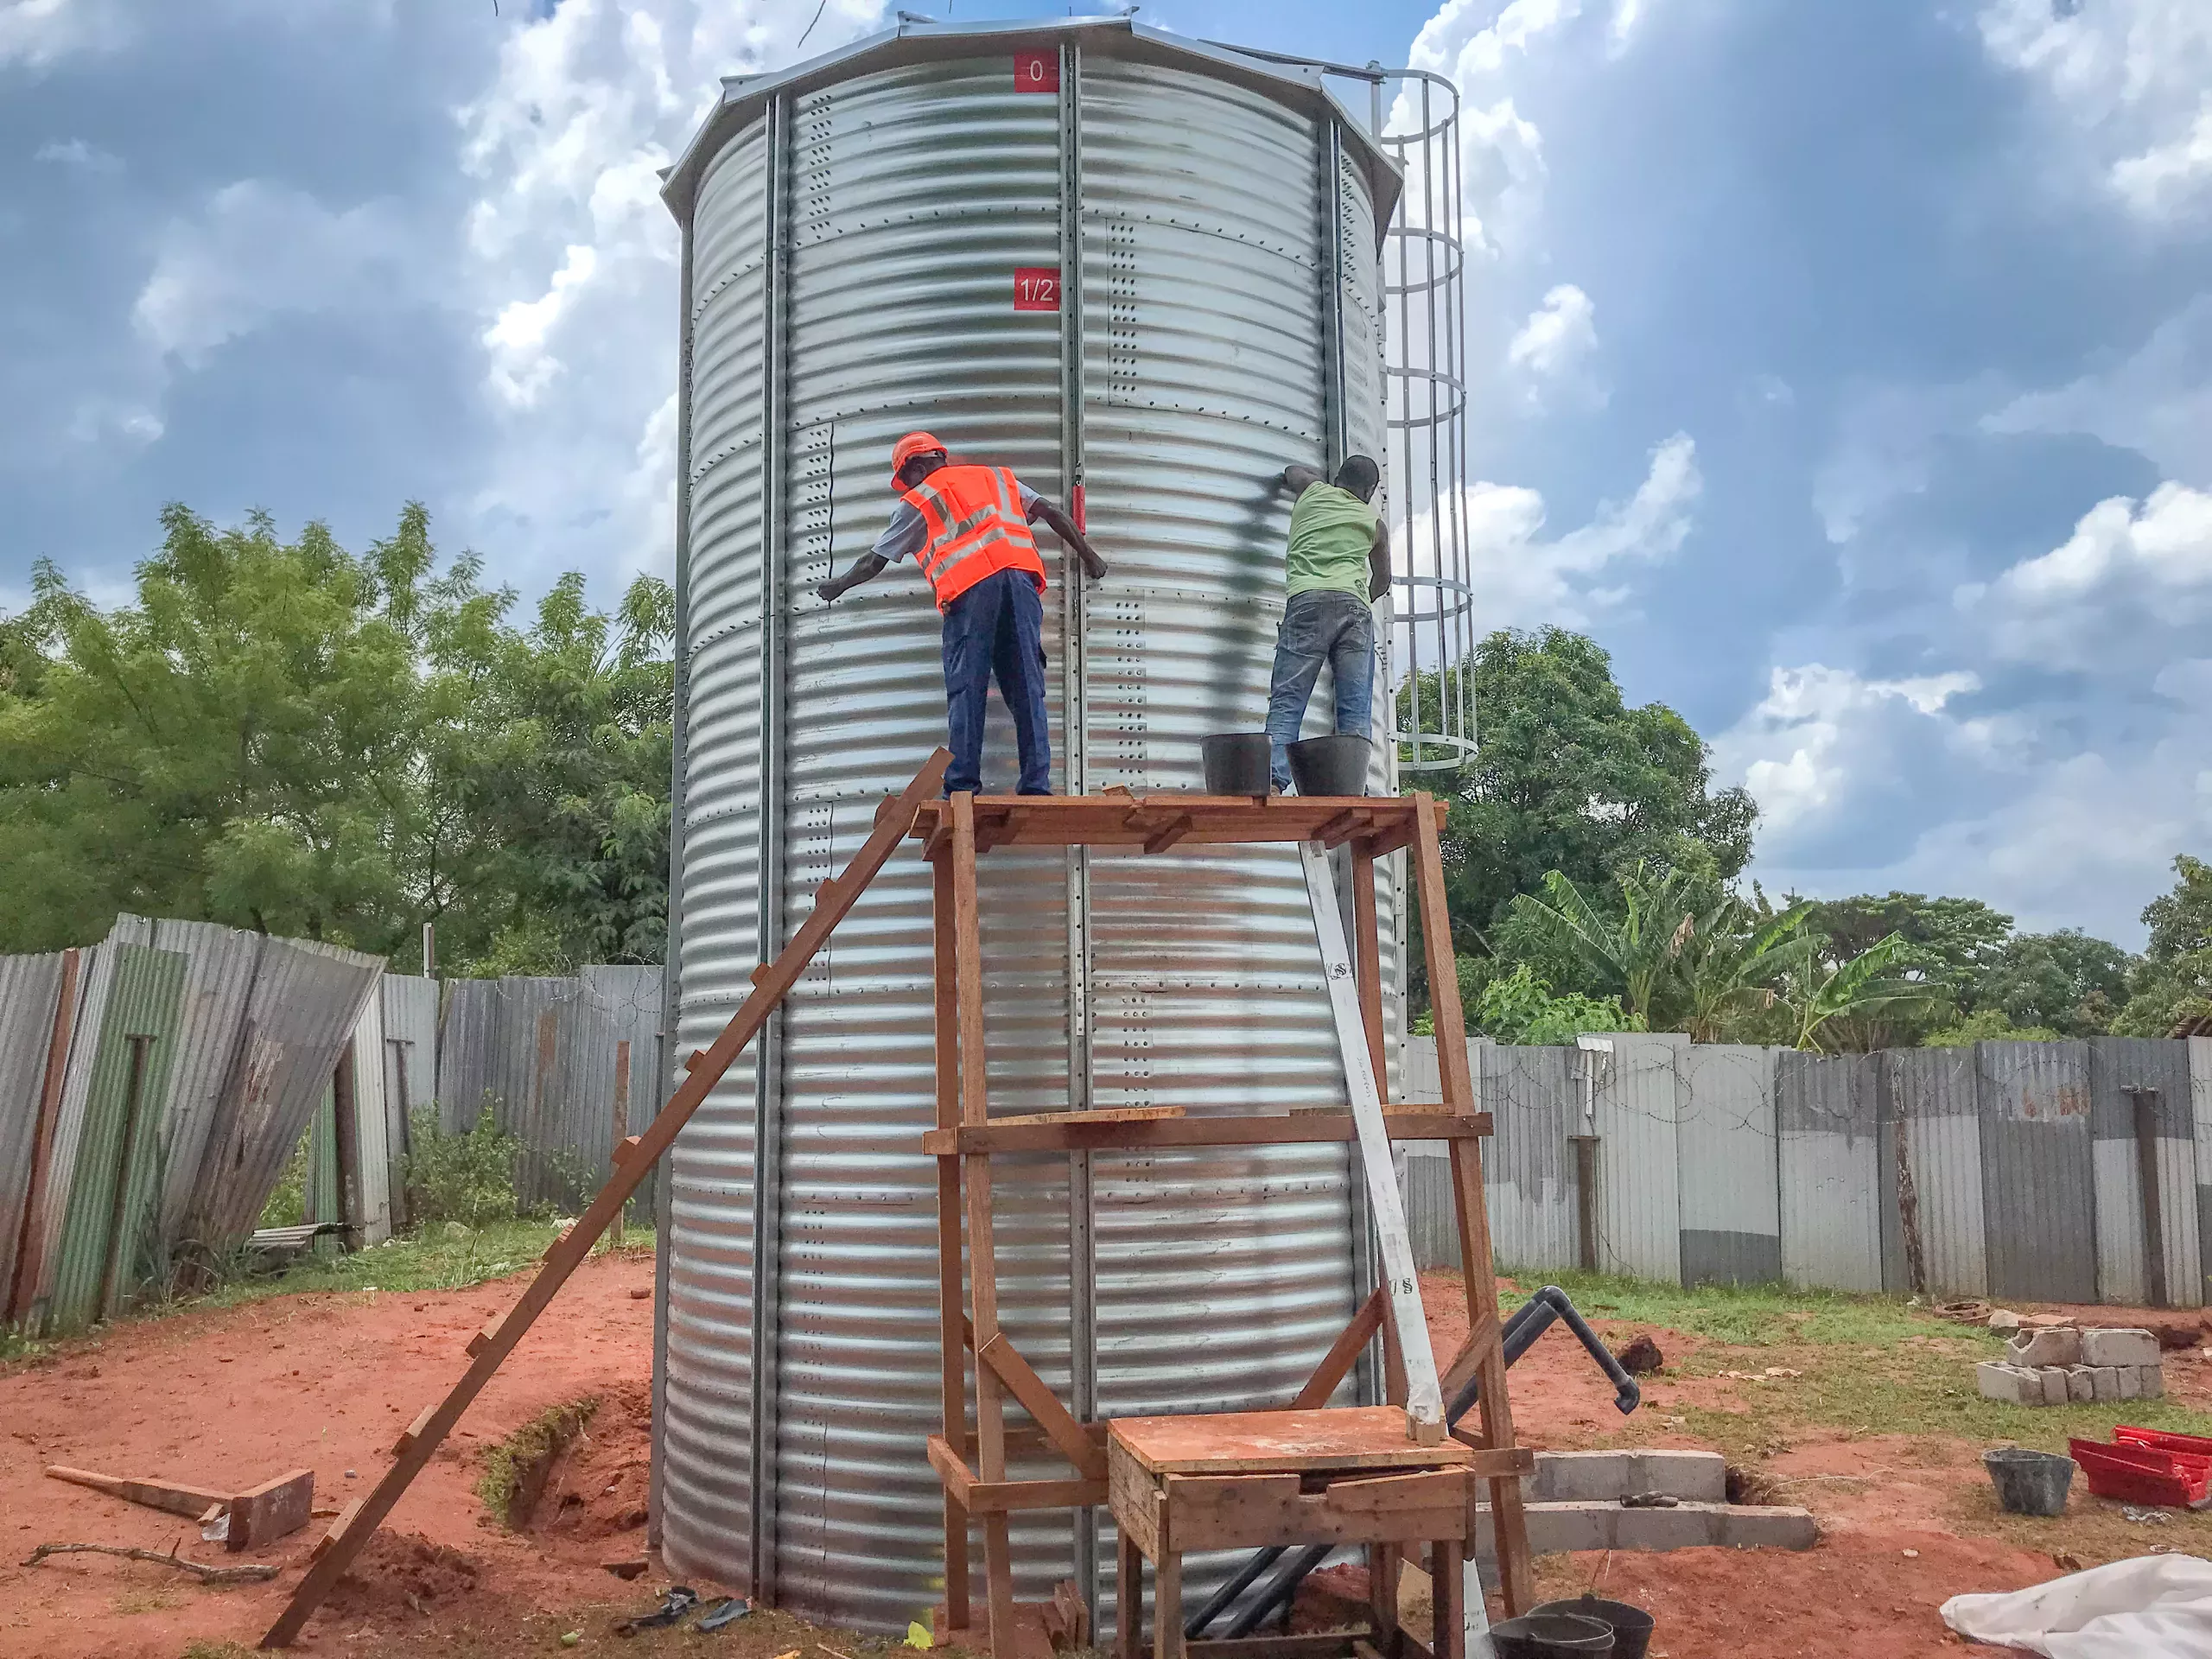 Two workers on a makeshift scaffold performing maintenance on a large metal water tank.